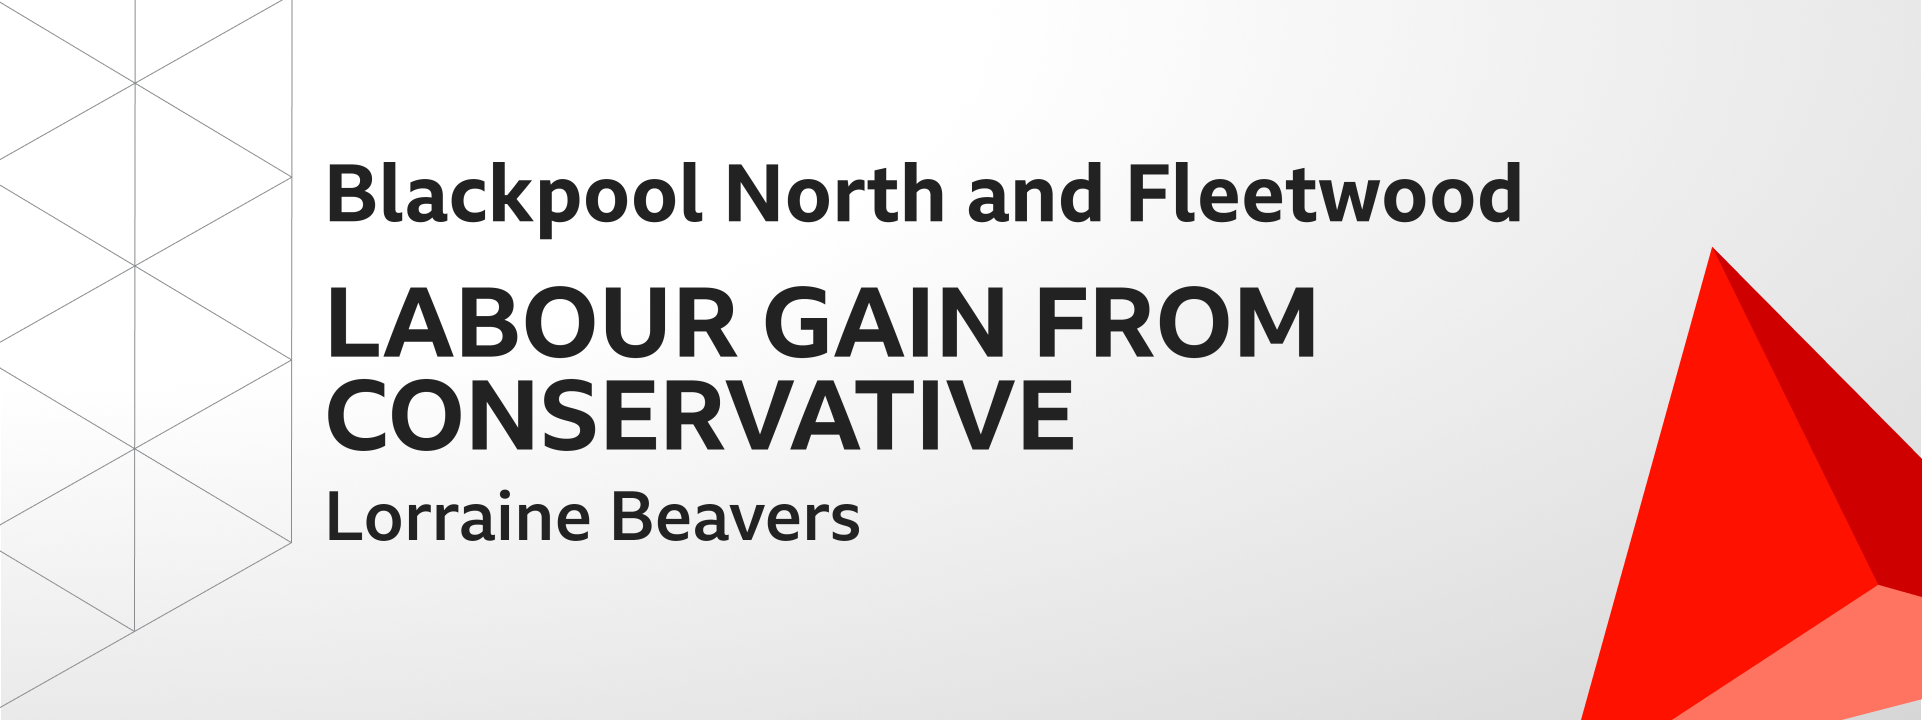 Graphic showing Labour gains Blackpool North and Fleetwood from the Conservatives. The winning candidate was Lorraine Beavers.